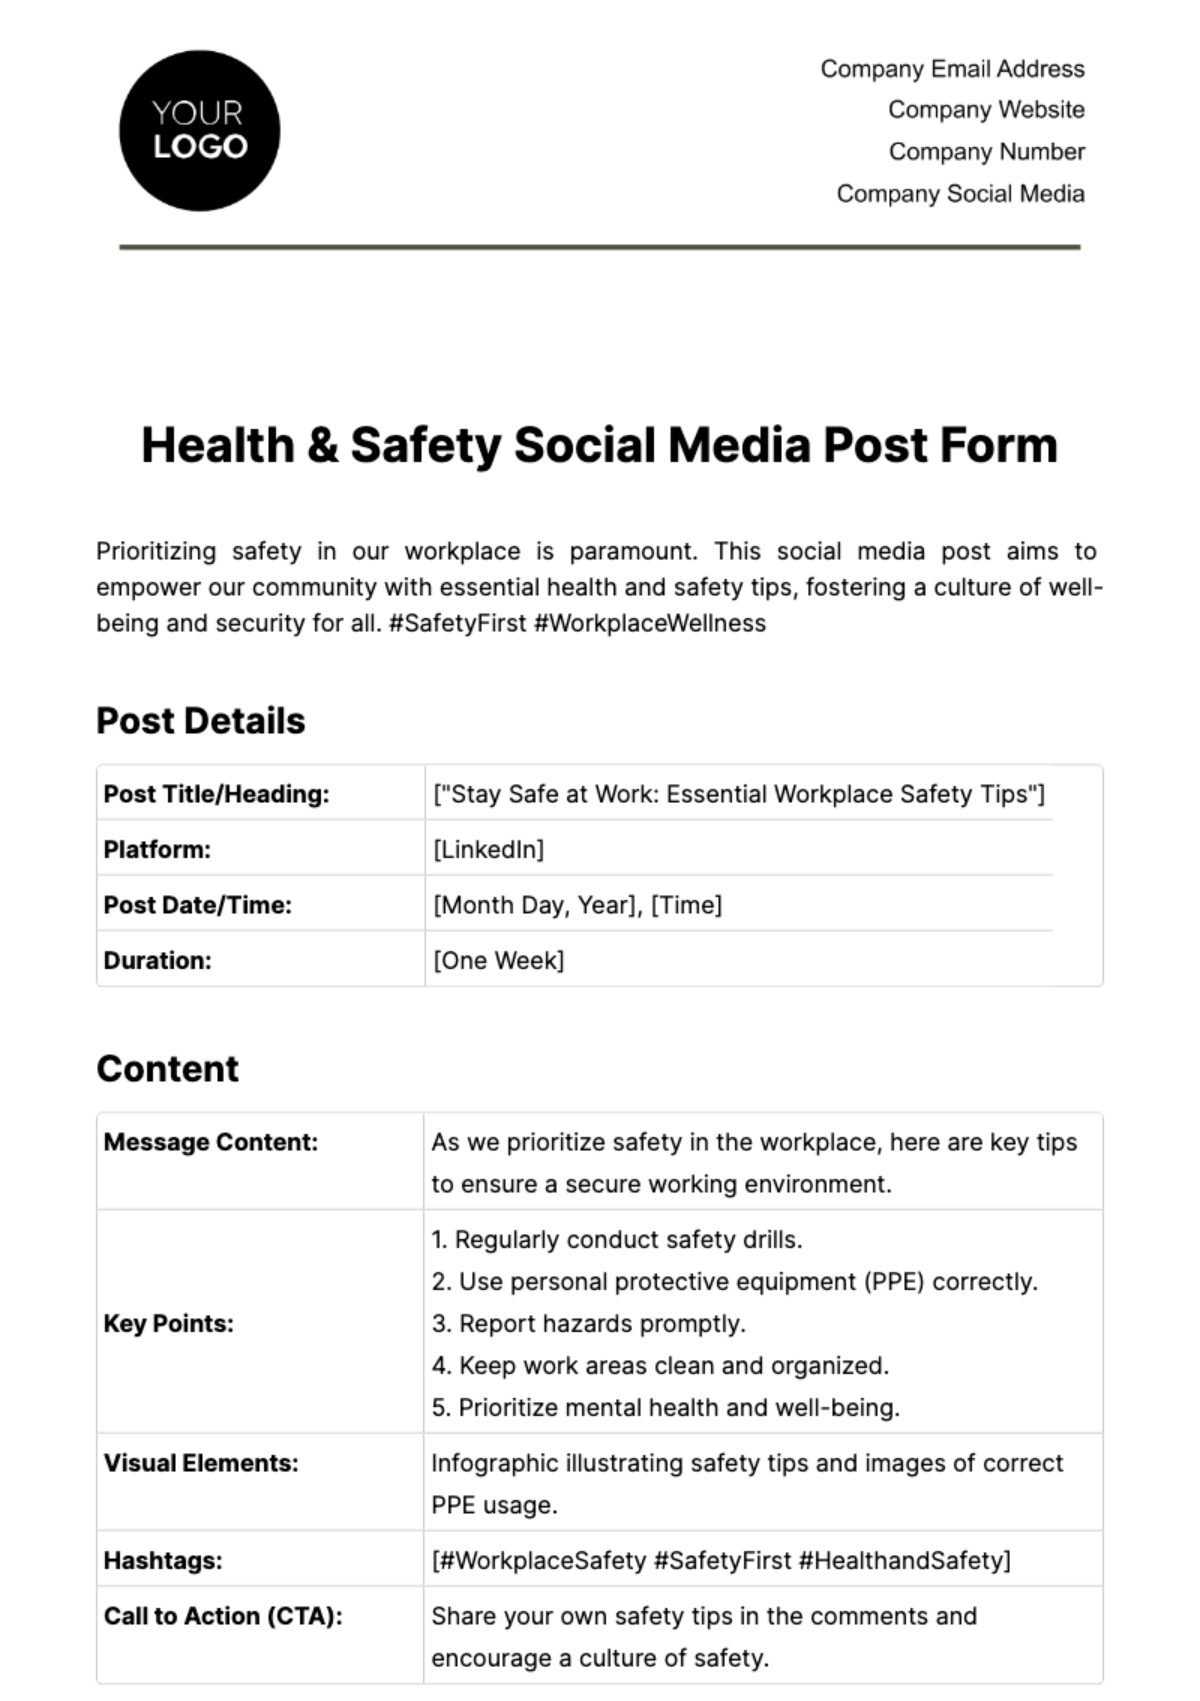 Free Health & Safety Social Media Post Form Template